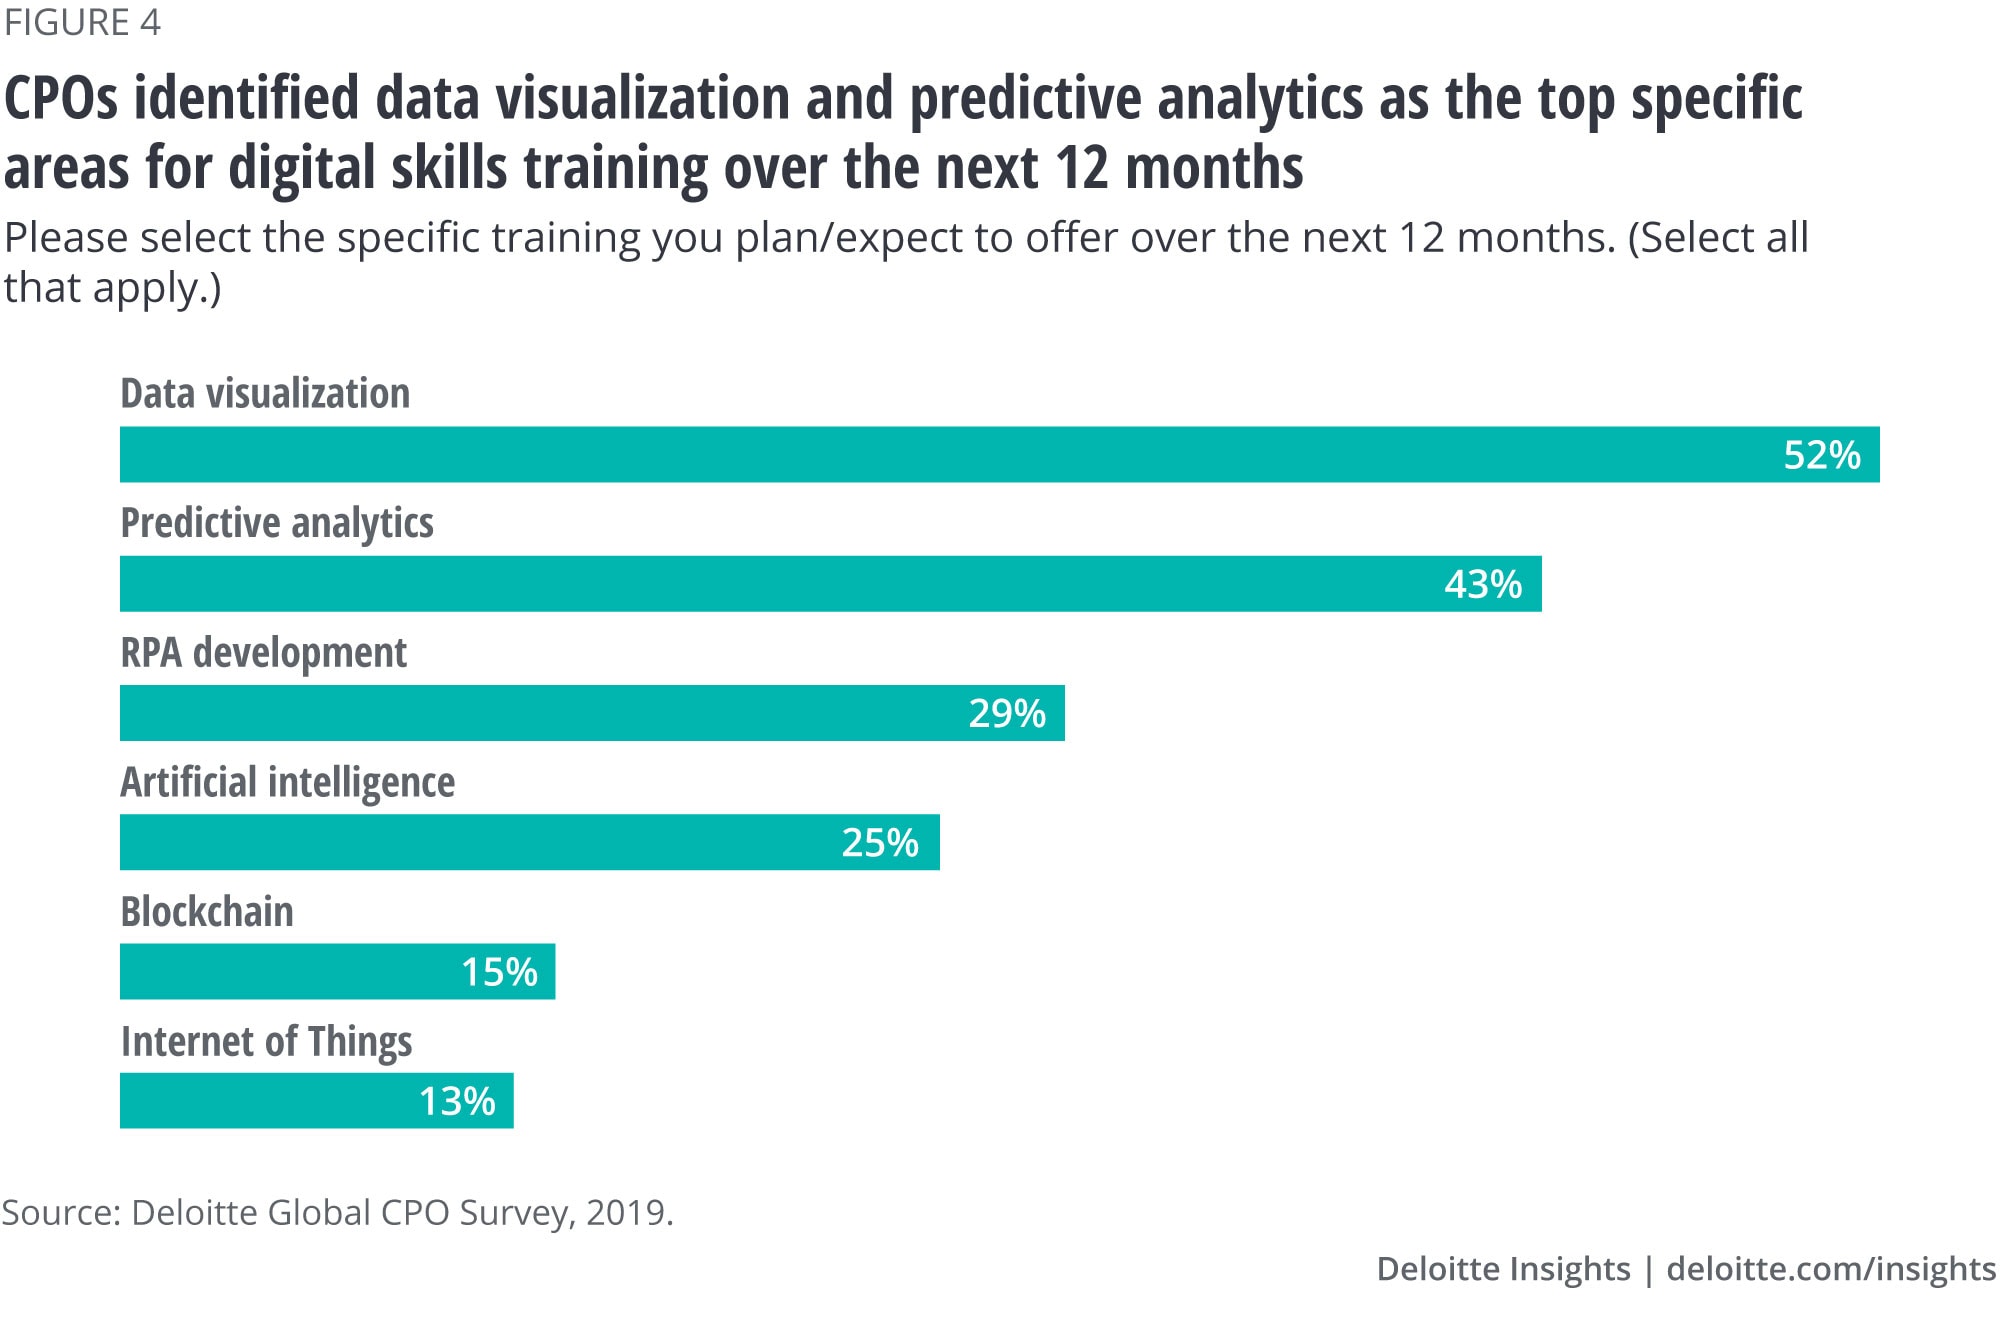 CPOs identified data visualization and predictive analytics as the top specific areas for digital skills training over the next 12 months